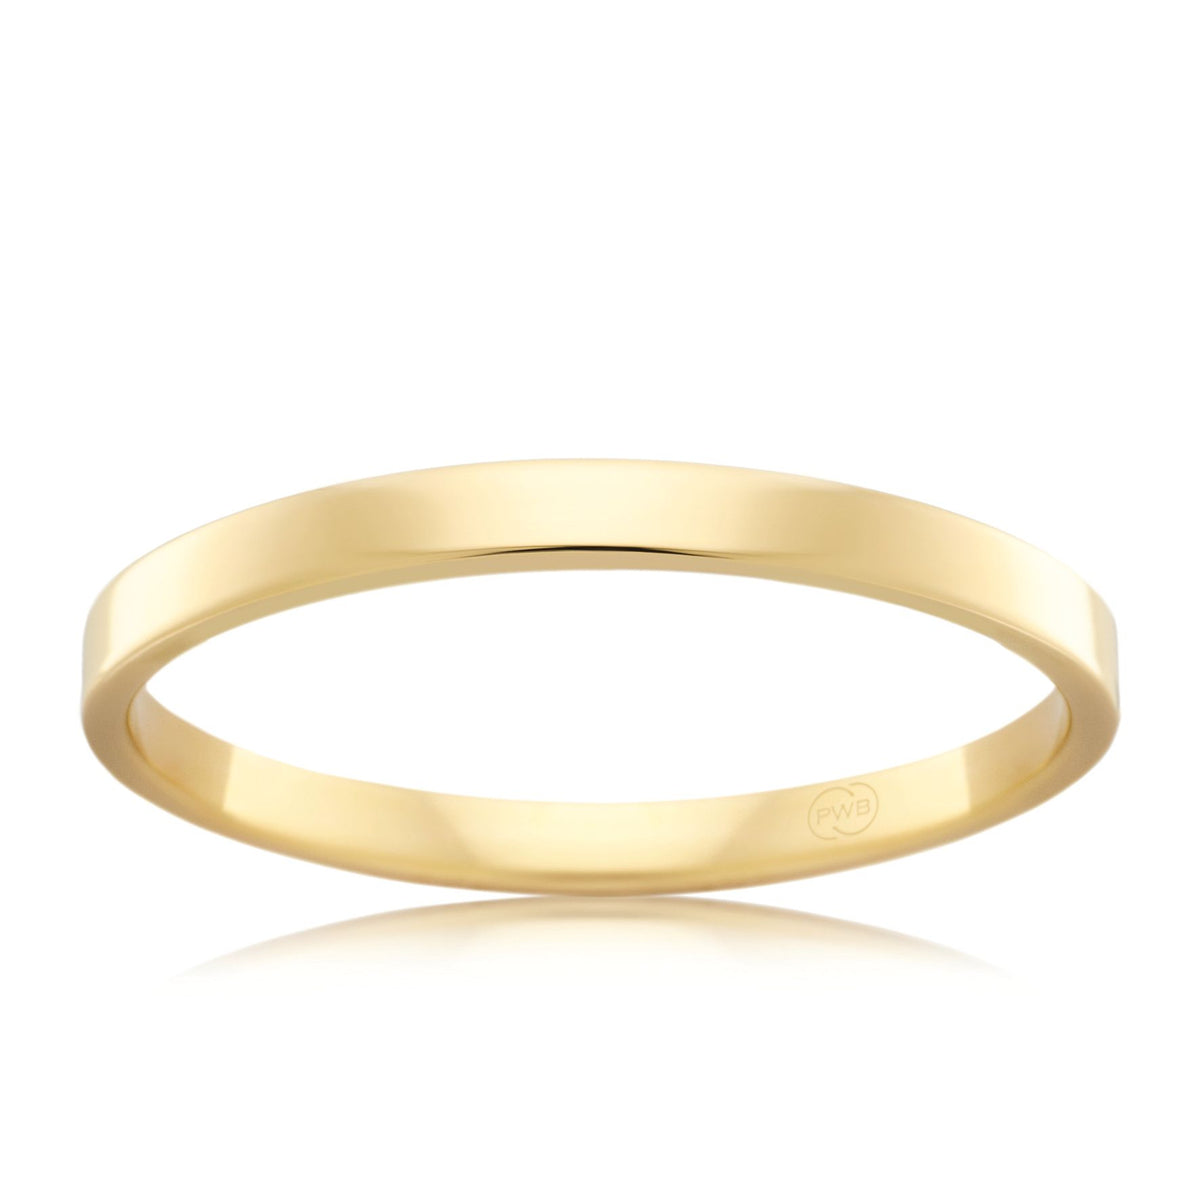 18ct Yellow Gold 2.5mm Wedding Ring - Duffs Jewellers